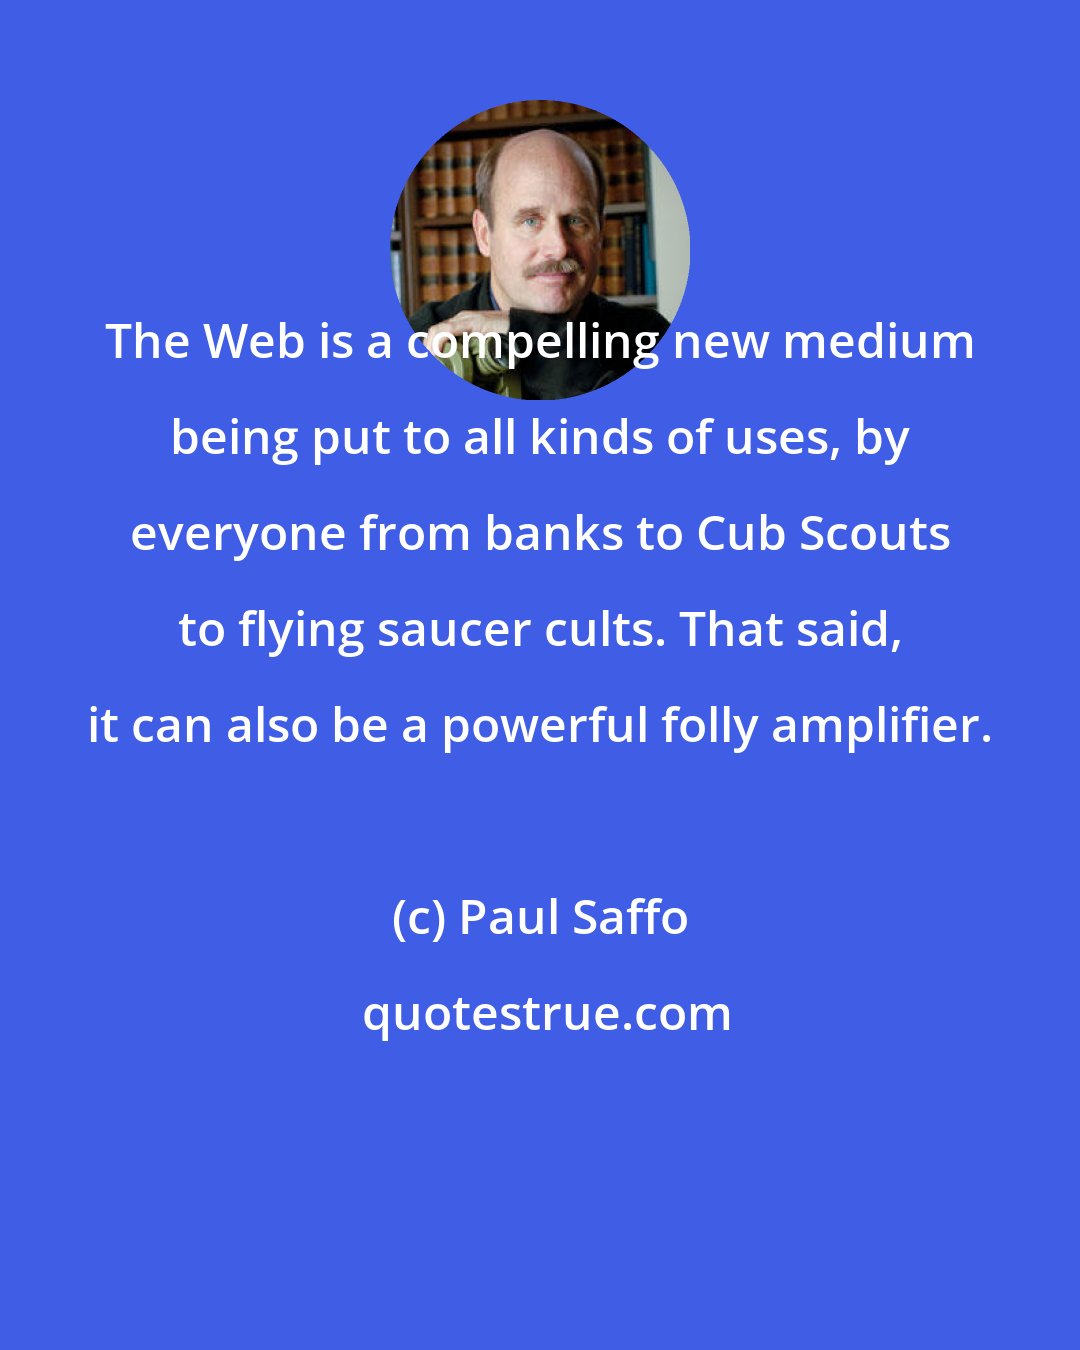 Paul Saffo: The Web is a compelling new medium being put to all kinds of uses, by everyone from banks to Cub Scouts to flying saucer cults. That said, it can also be a powerful folly amplifier.